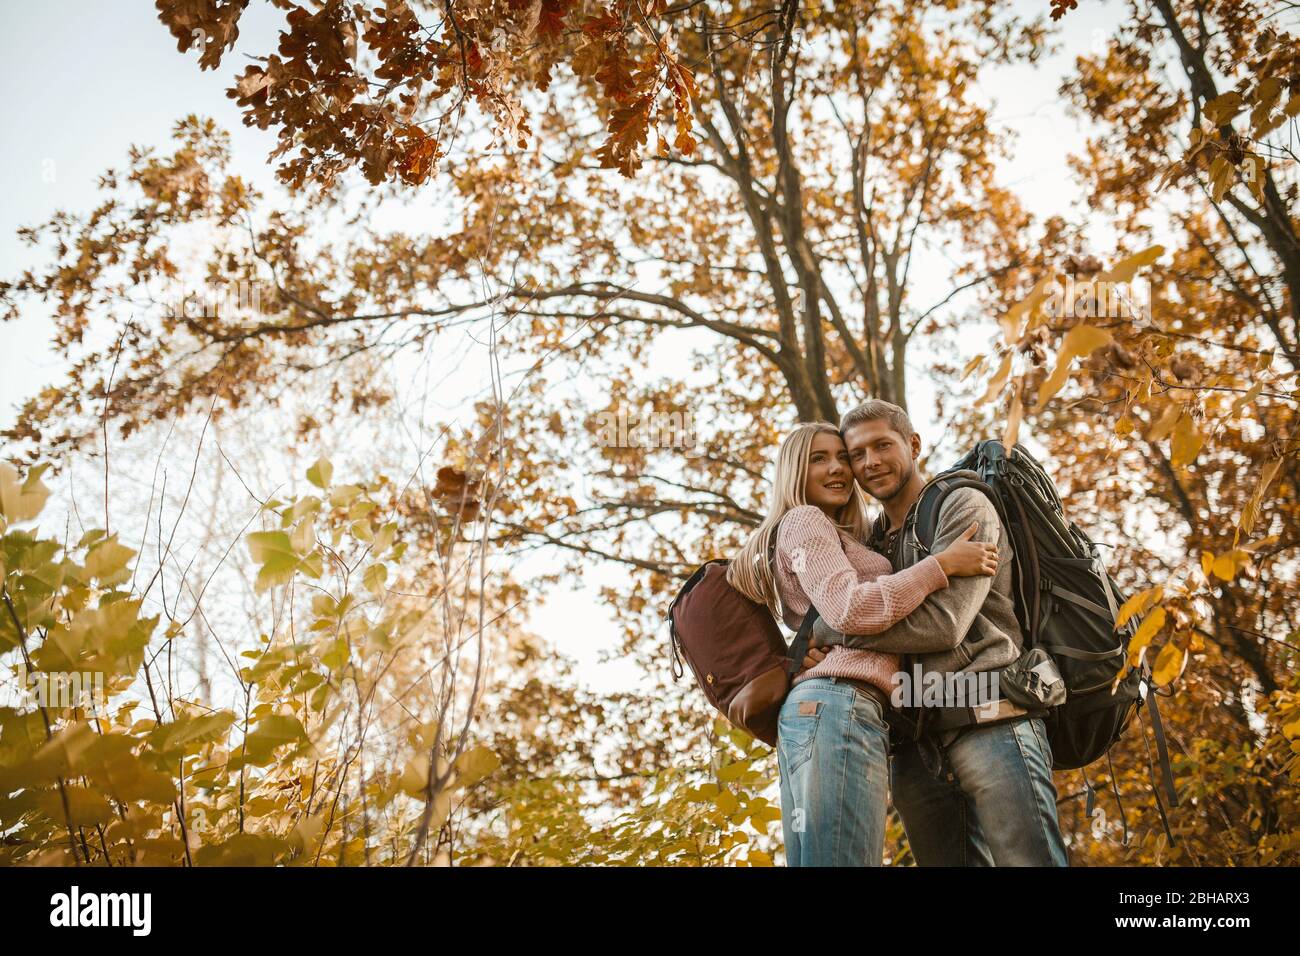 Man And Woman Hugs Standing In Autumn Forest Stock Photo